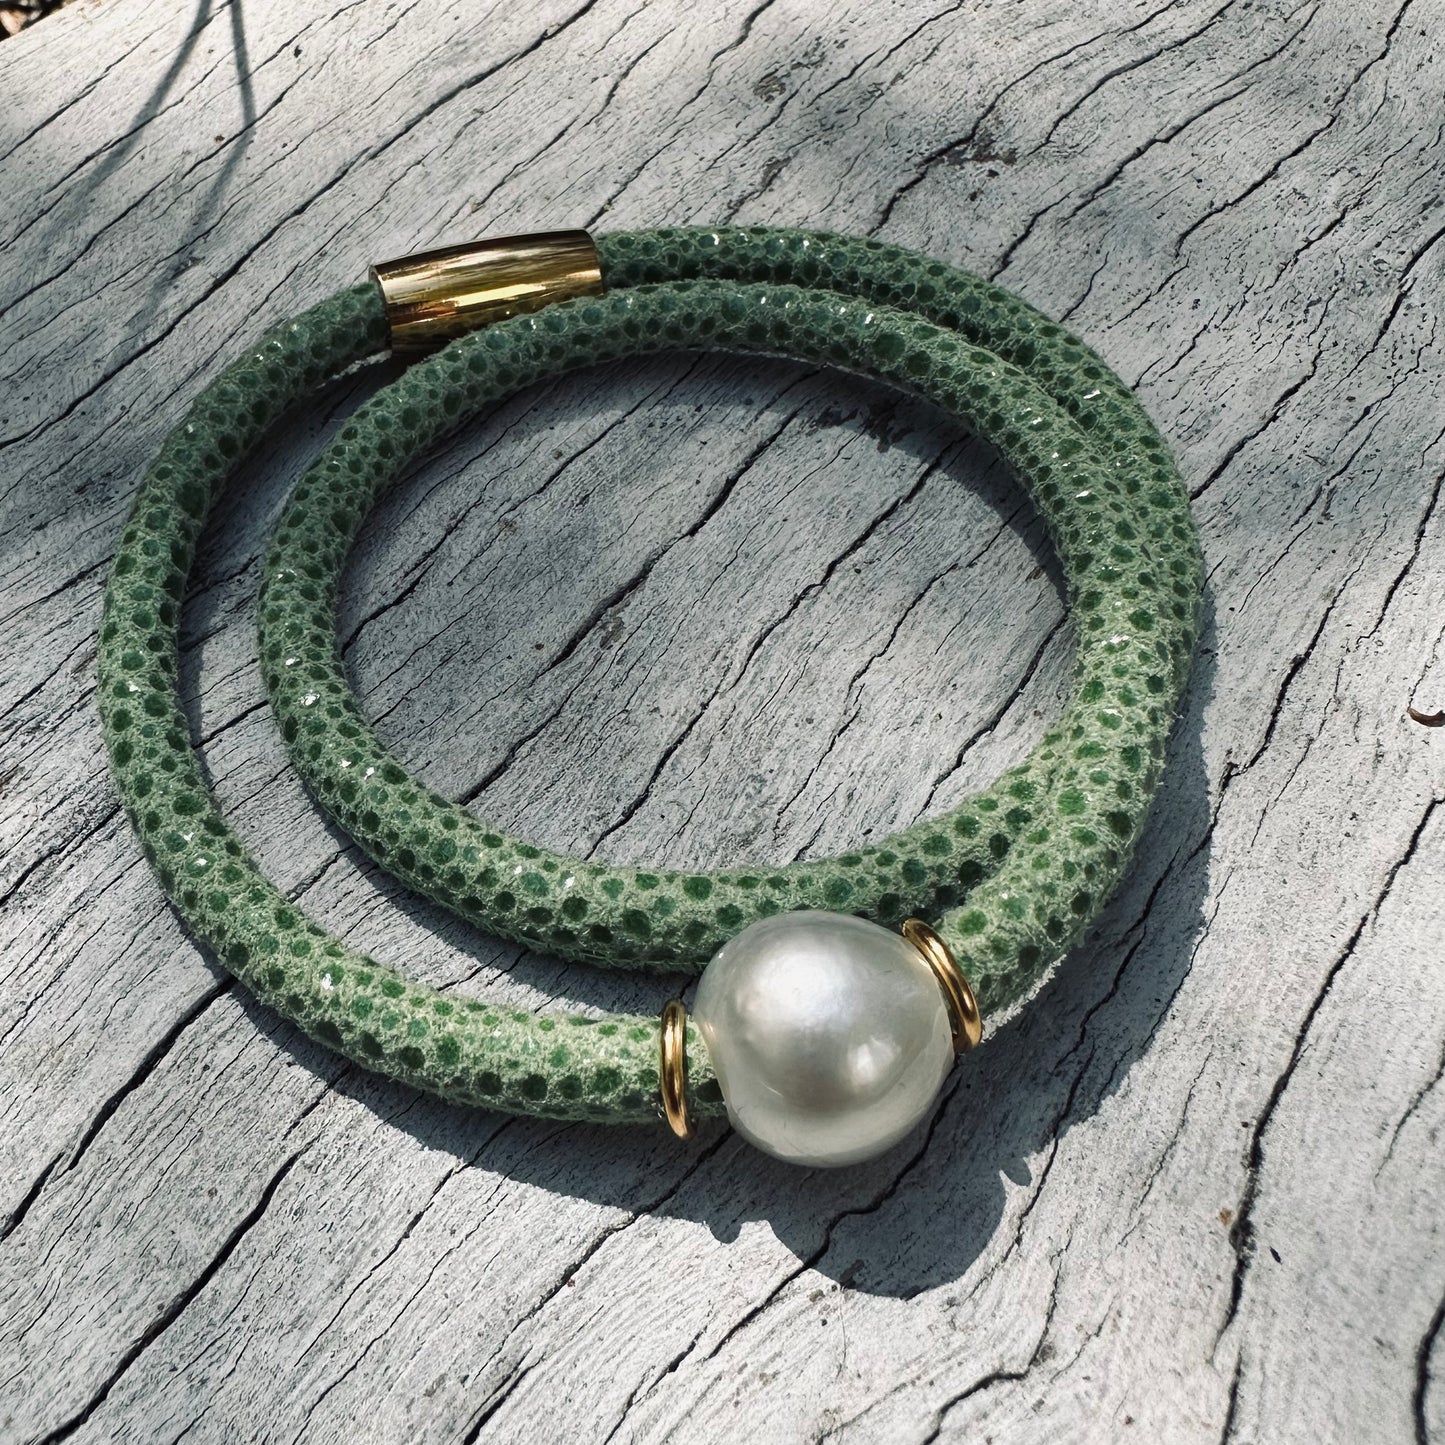 Bracelet - South Sea Pearl on Green Leather